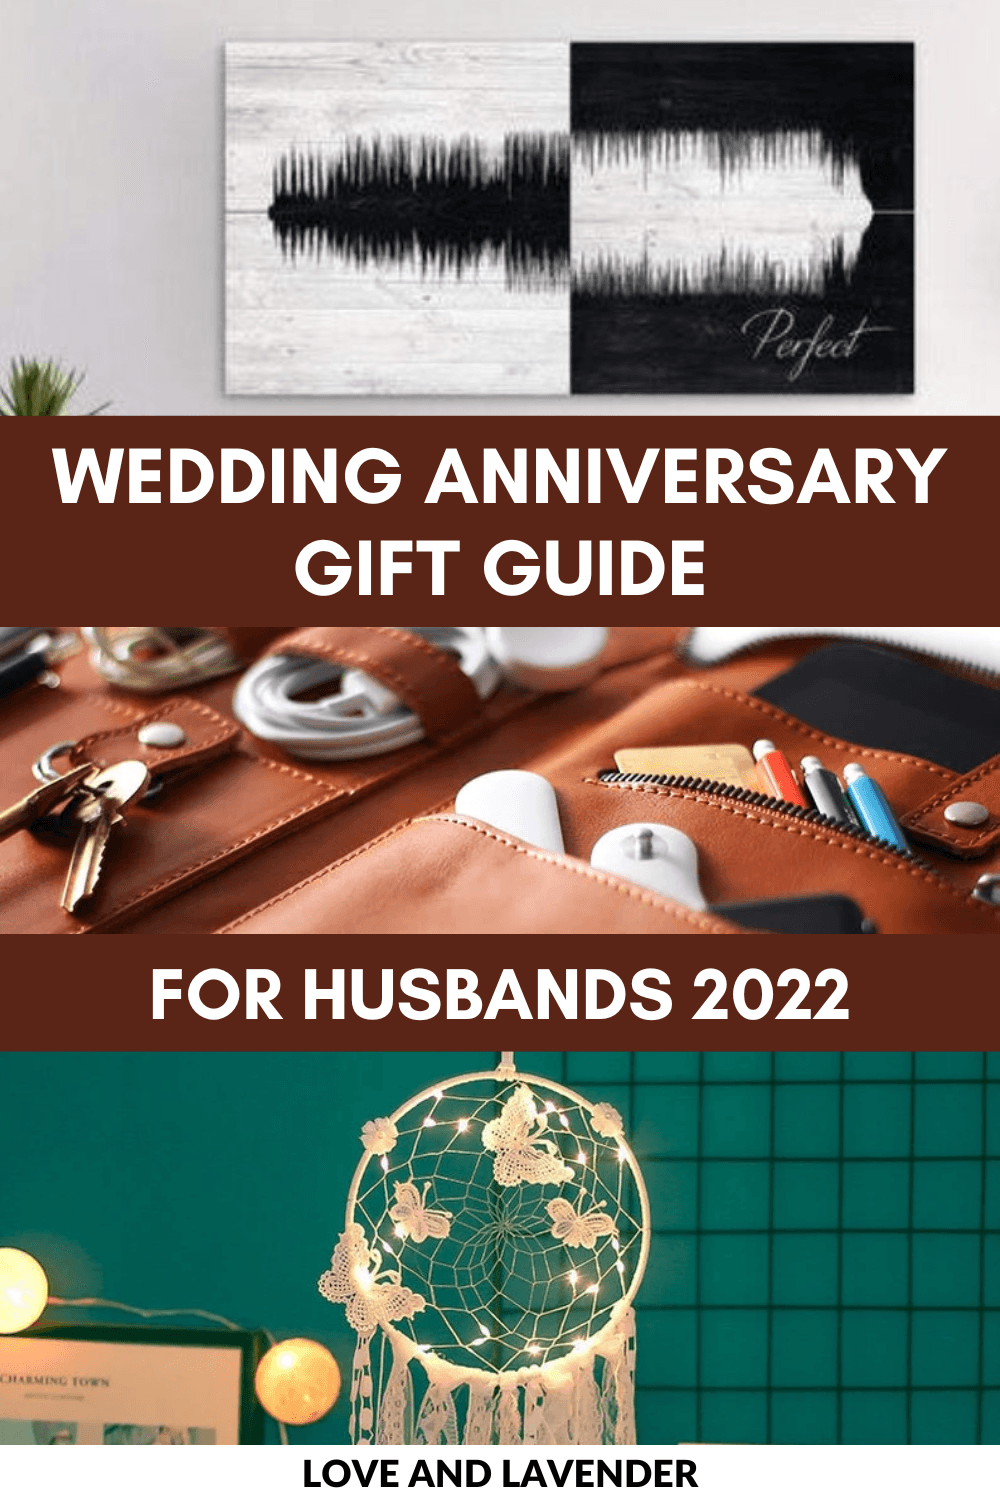 If you're looking for an anniversary gift for a husband, it has to be special, thoughtful, practical and stylish. We put together a list of the best wedding anniversary ideas for him. Don't miss it here!